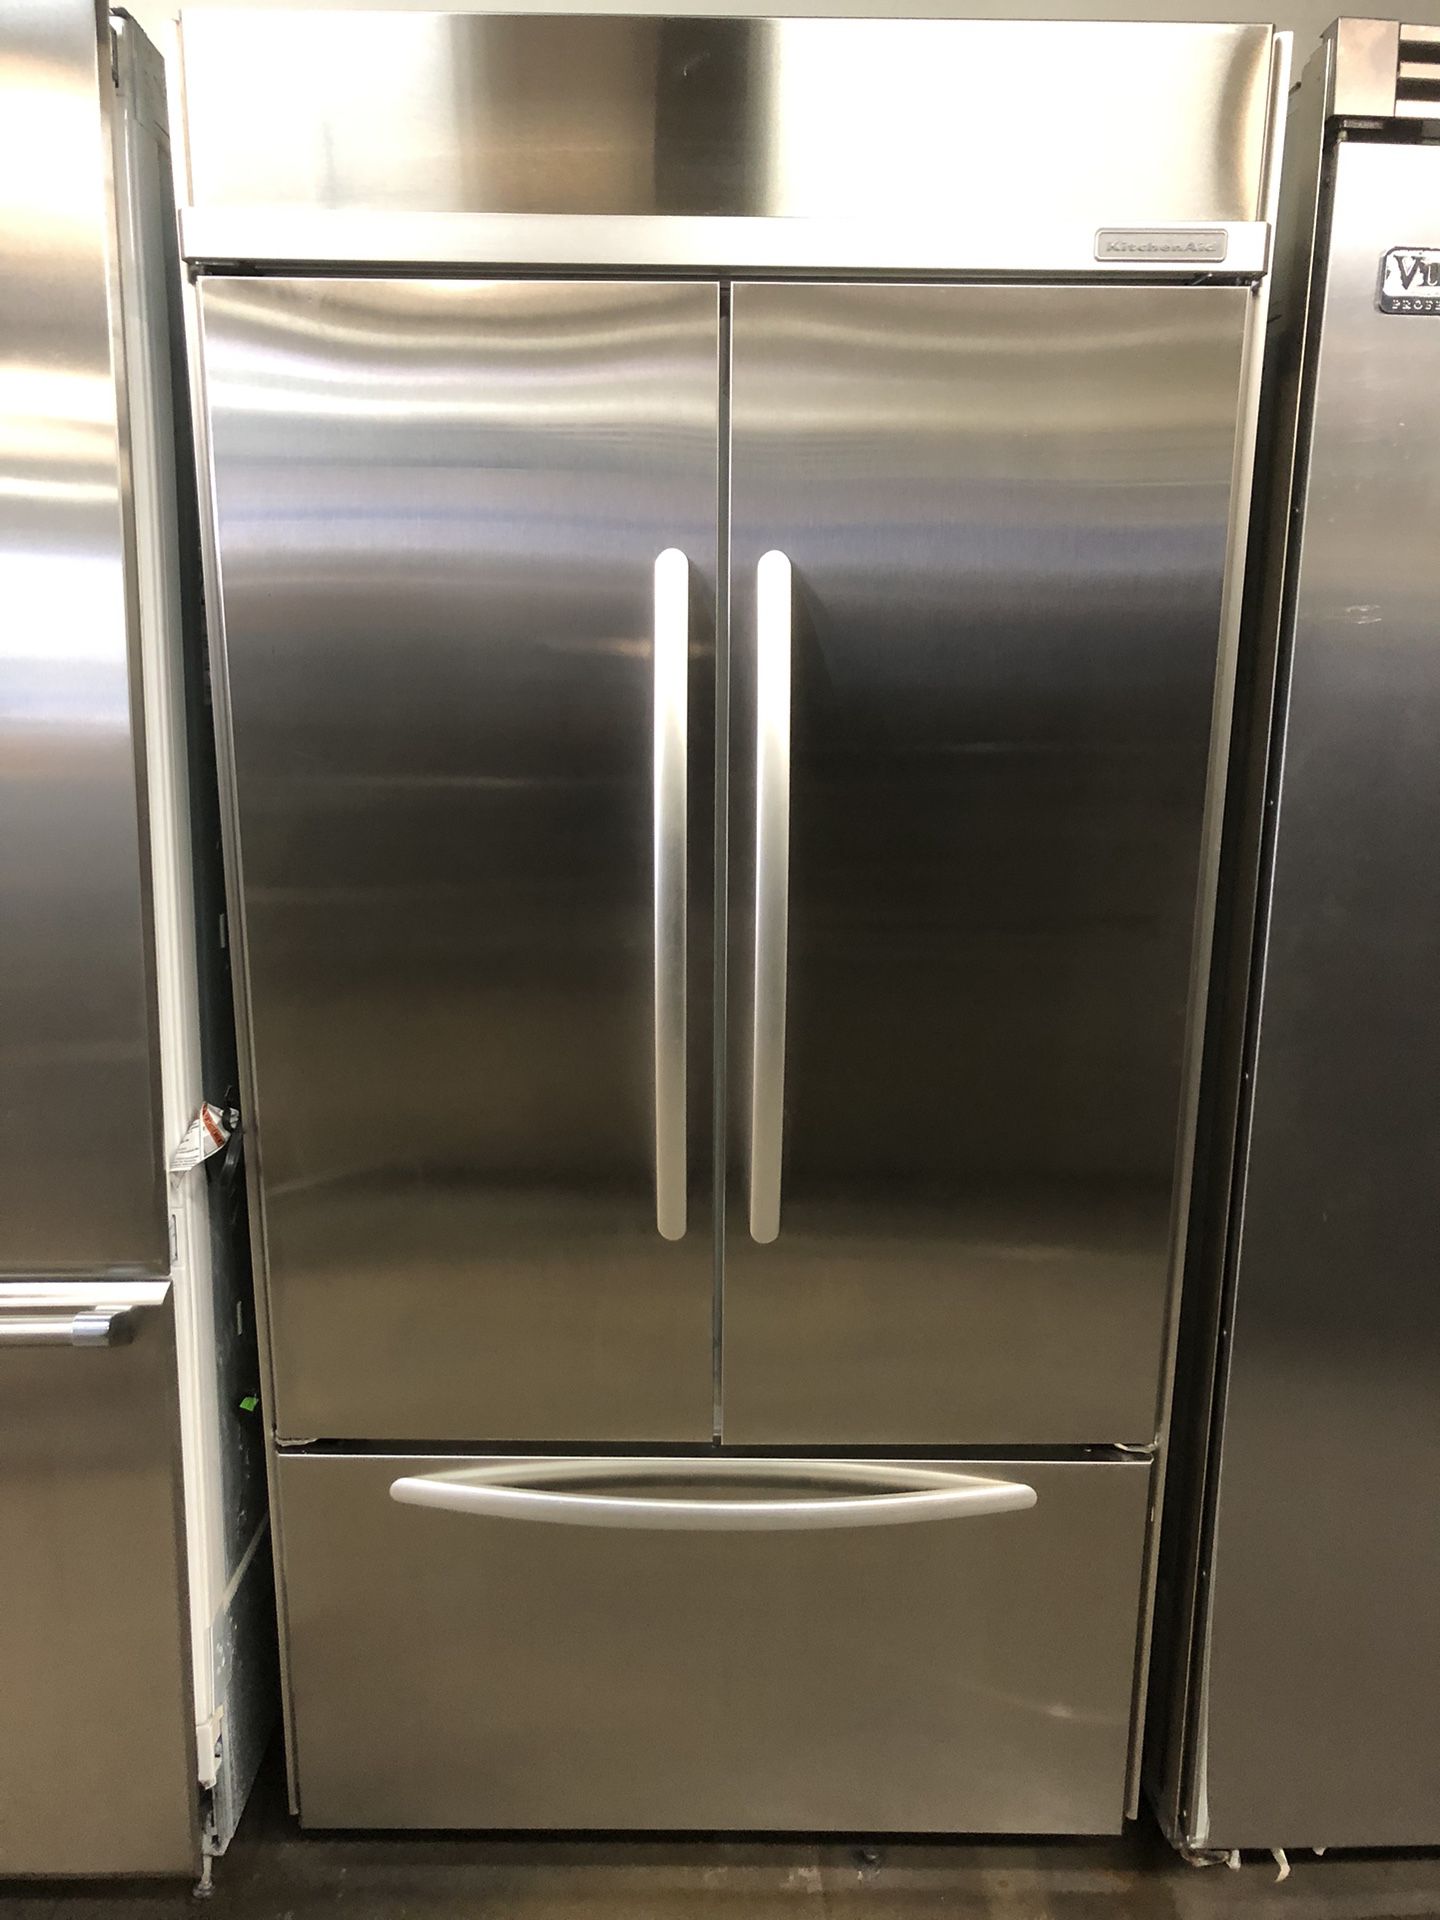 Kitchen Aid 42” Stainless Steel Built In French Door Refrigerator 